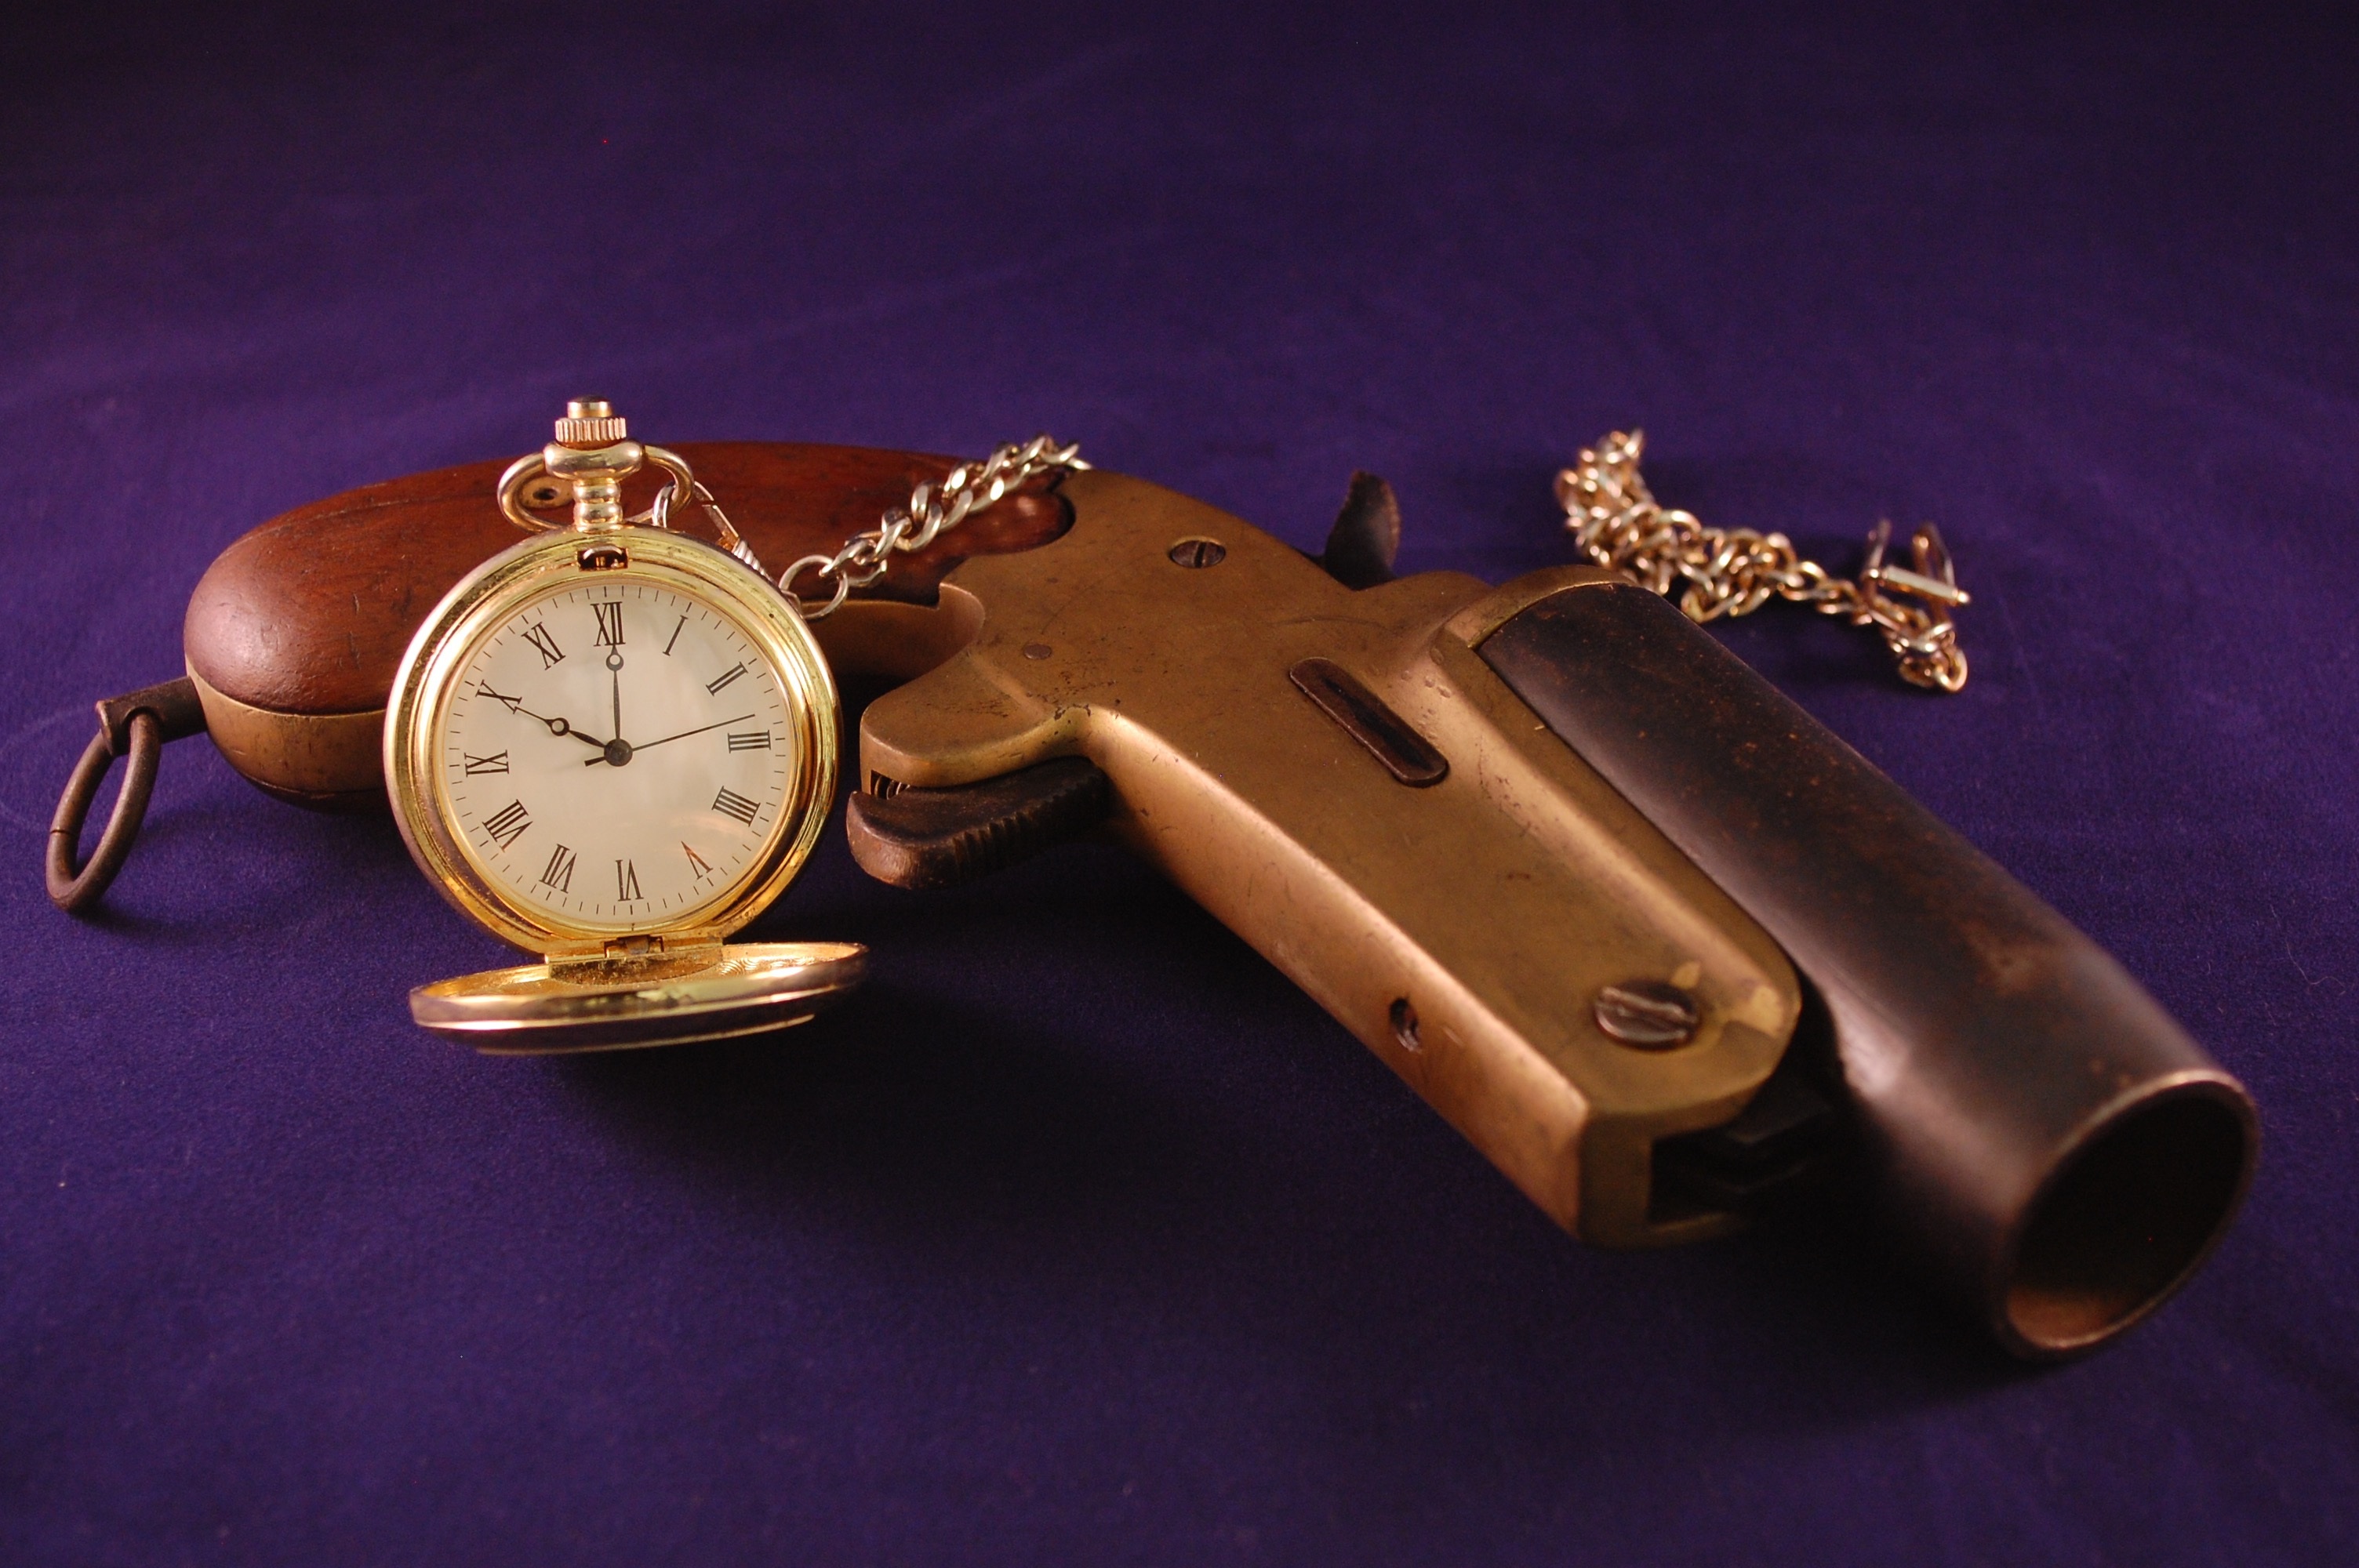 Antique flare gun and pocket watch also known as a fob watch by gavilla